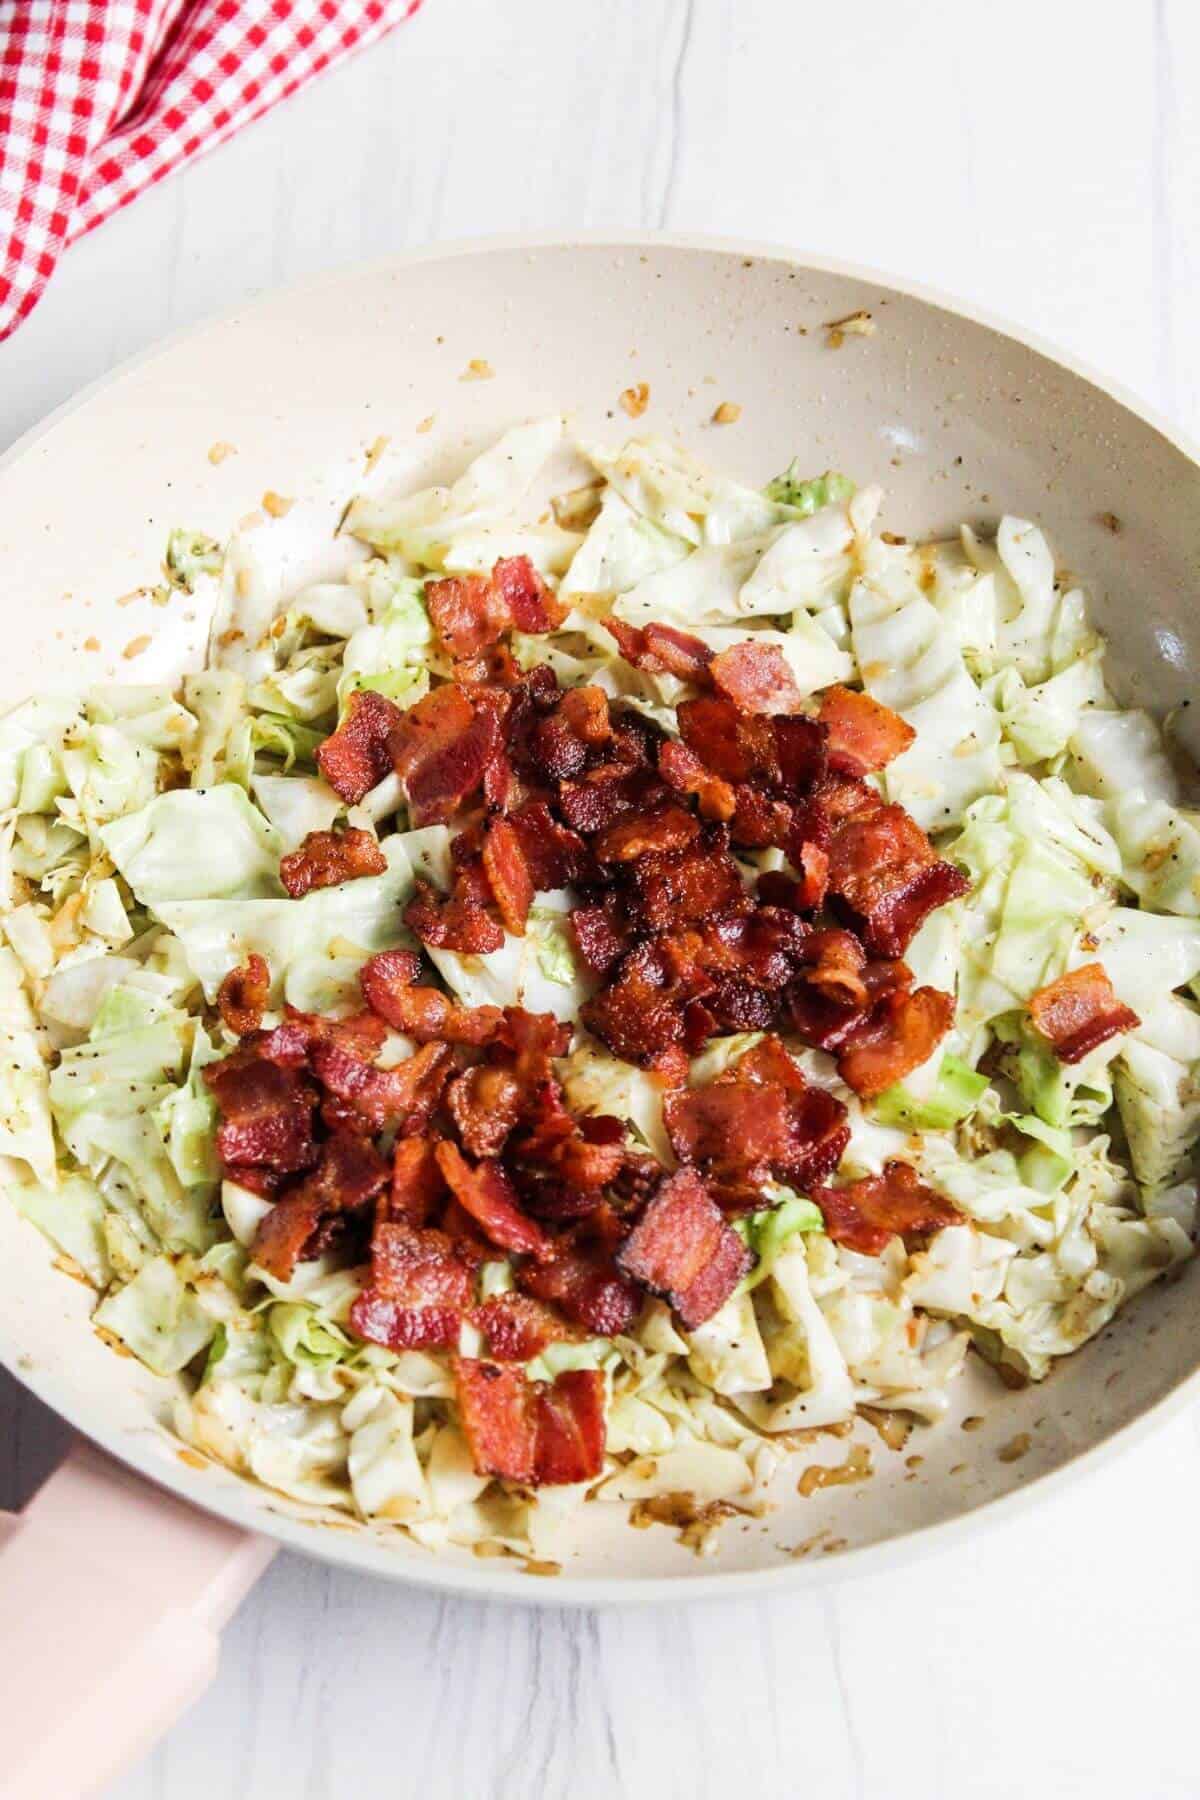 Cooked bacon pieces added to cabbage in skillet.